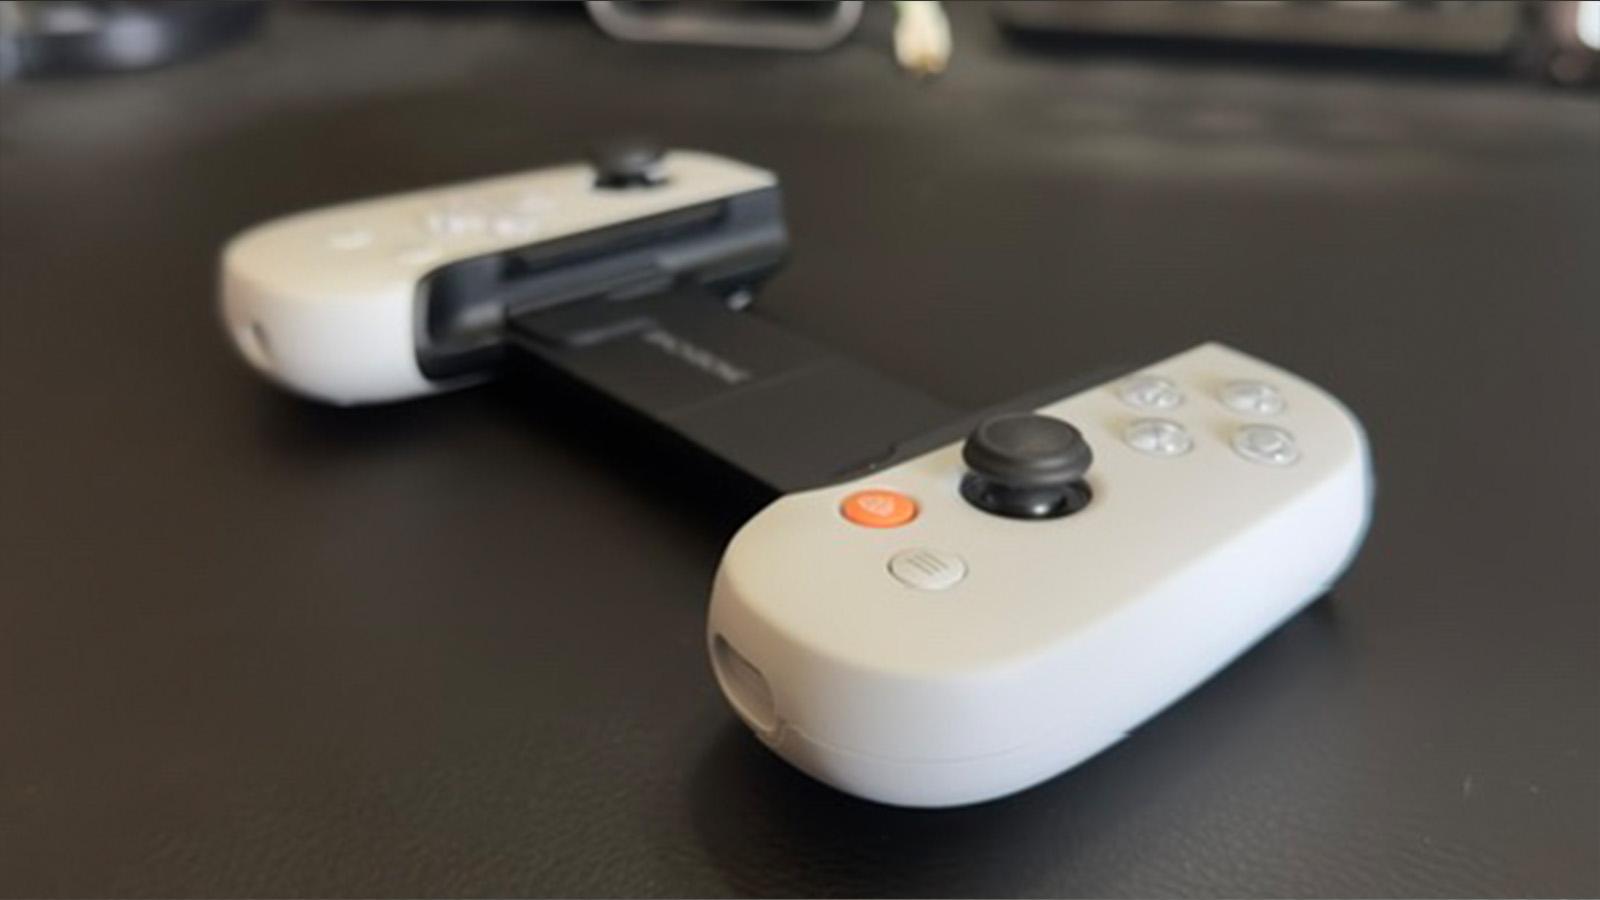 Backbone One iOS controller review